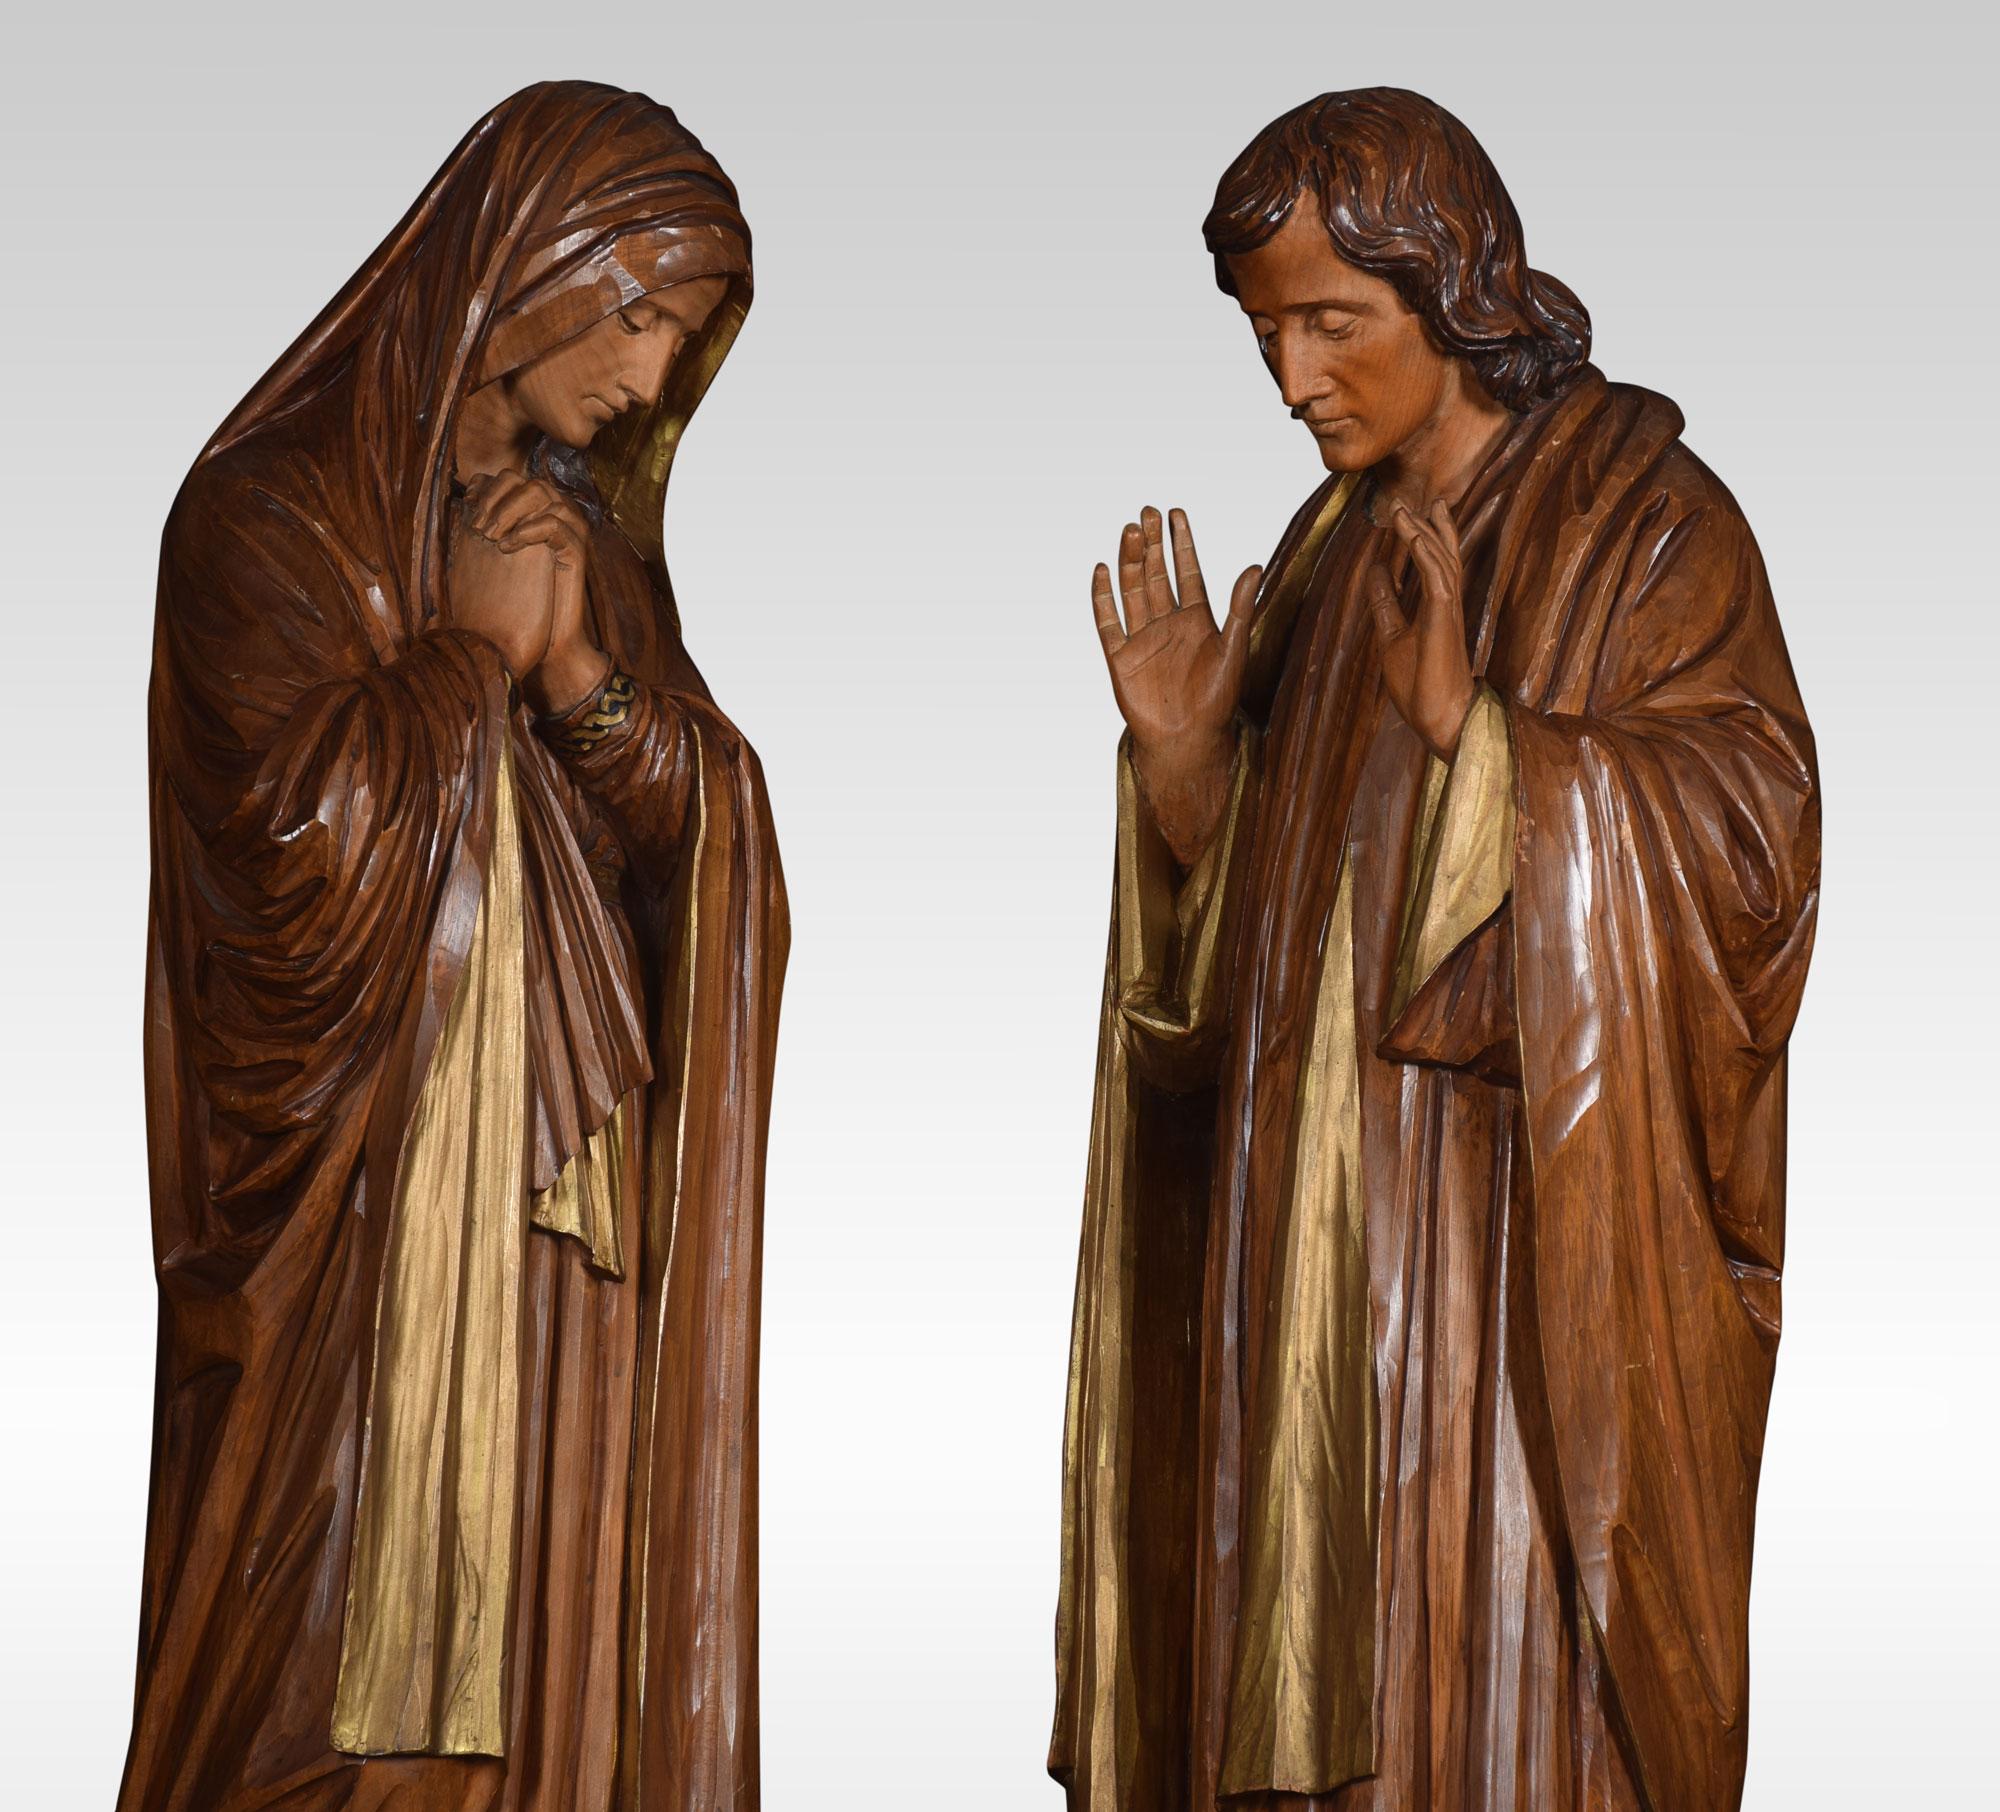 Large pair of carved polychrome decorated linden wood figures of Saints, the female wearing flowing robes, the male with his hands upturned. All raised up on octagonal bases.
Dimensions:
Female
Height 35 inches
Length 10 inches
width 8.5